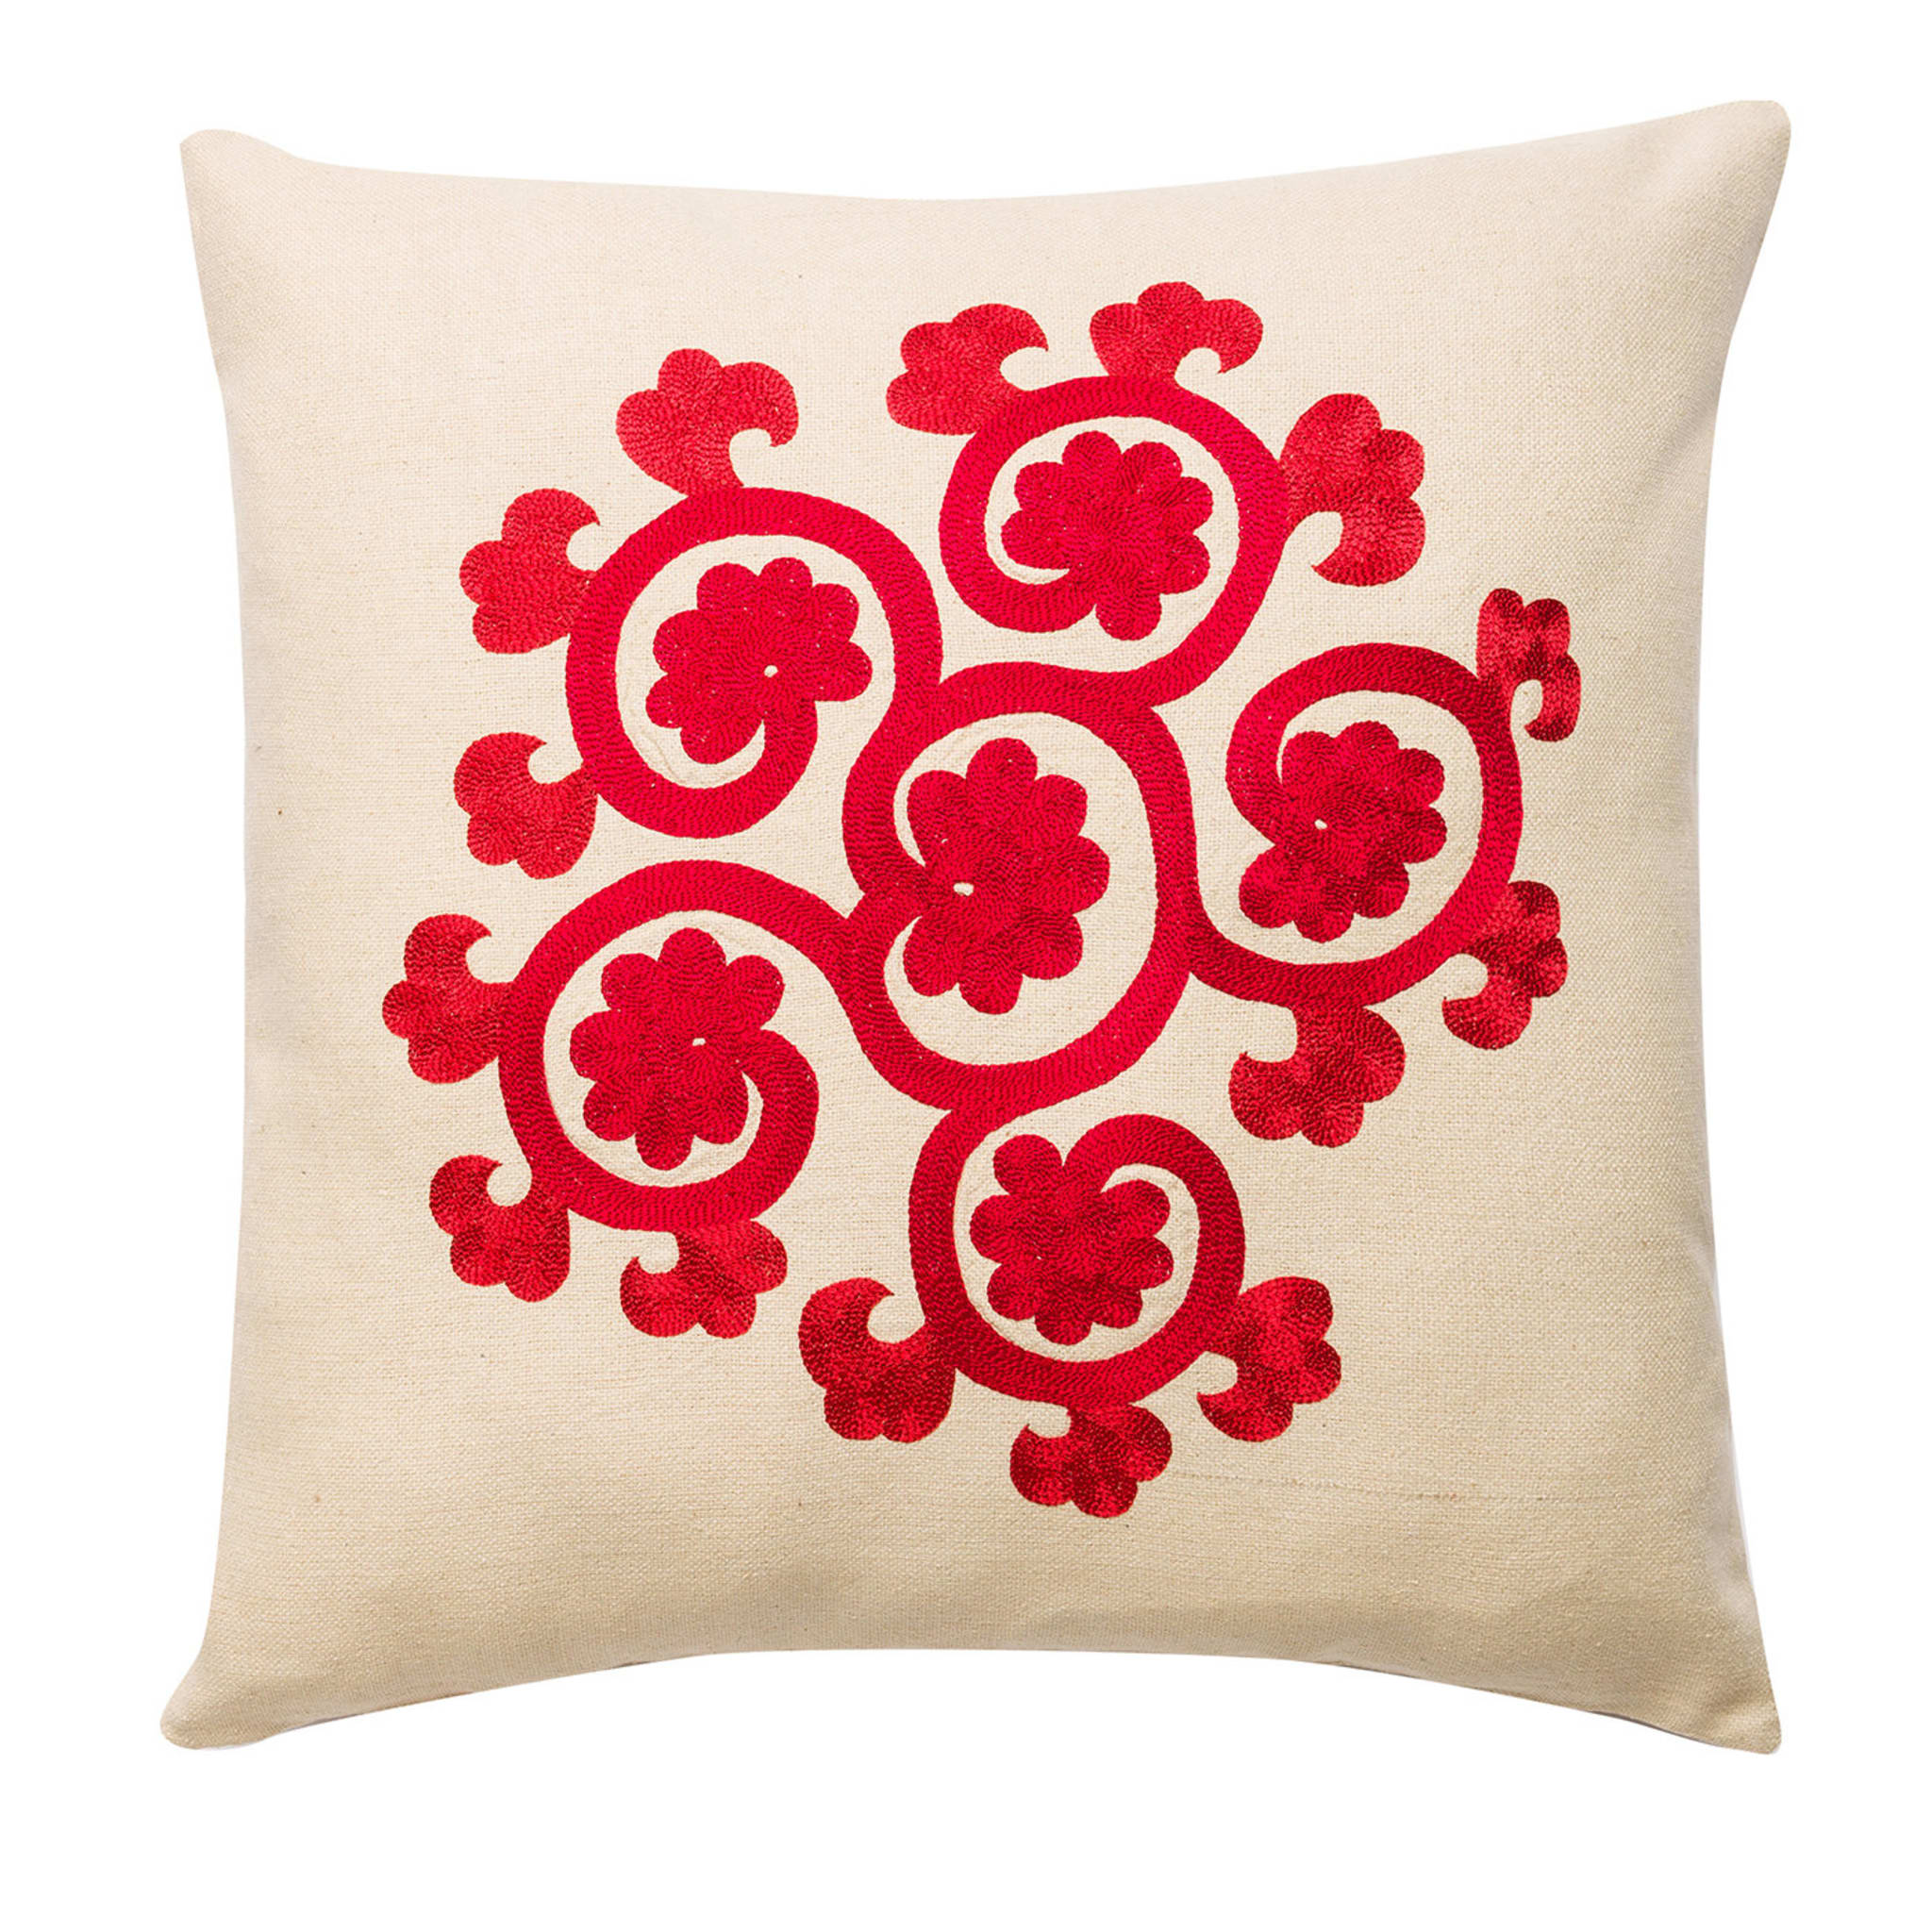 Flower Square Red Pillowcase - Main view